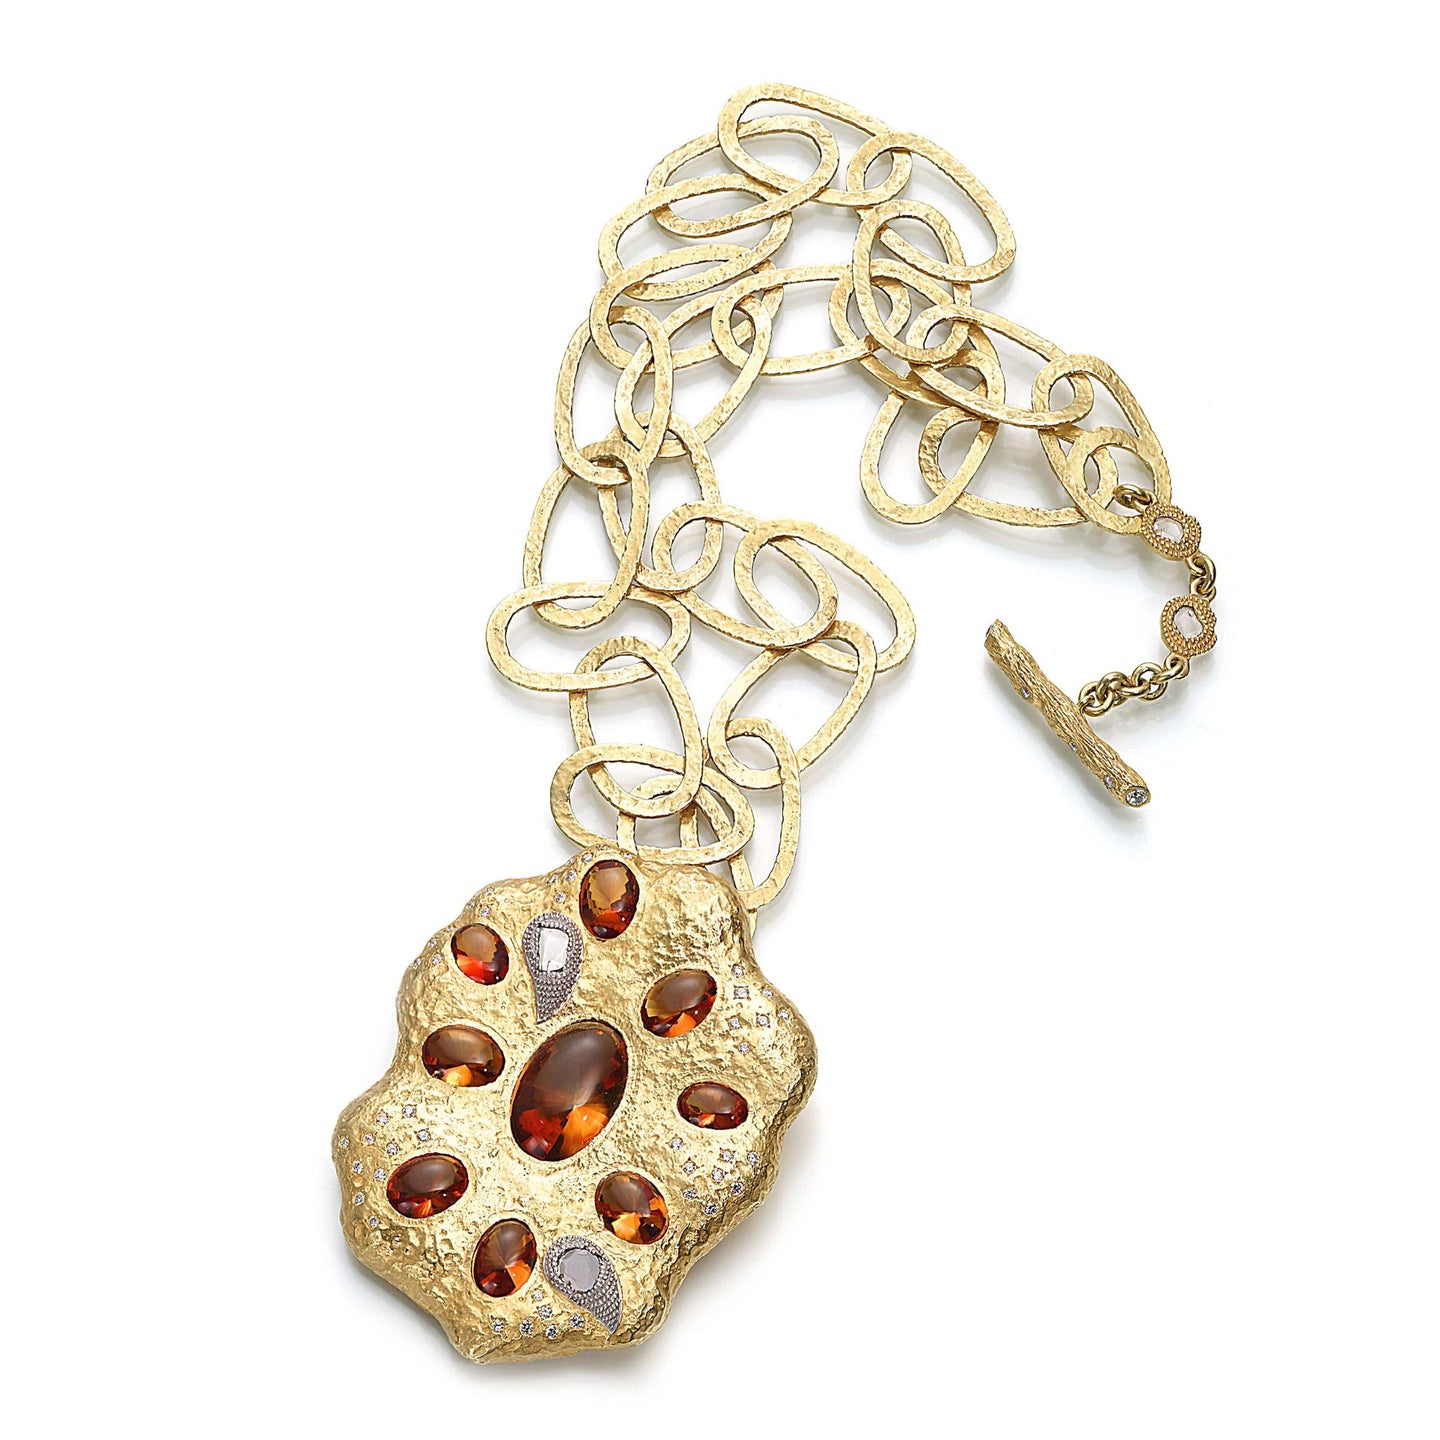 Serenity 20K Yellow Gold Pendant with Madeira Citrine and Diamonds - Coomi